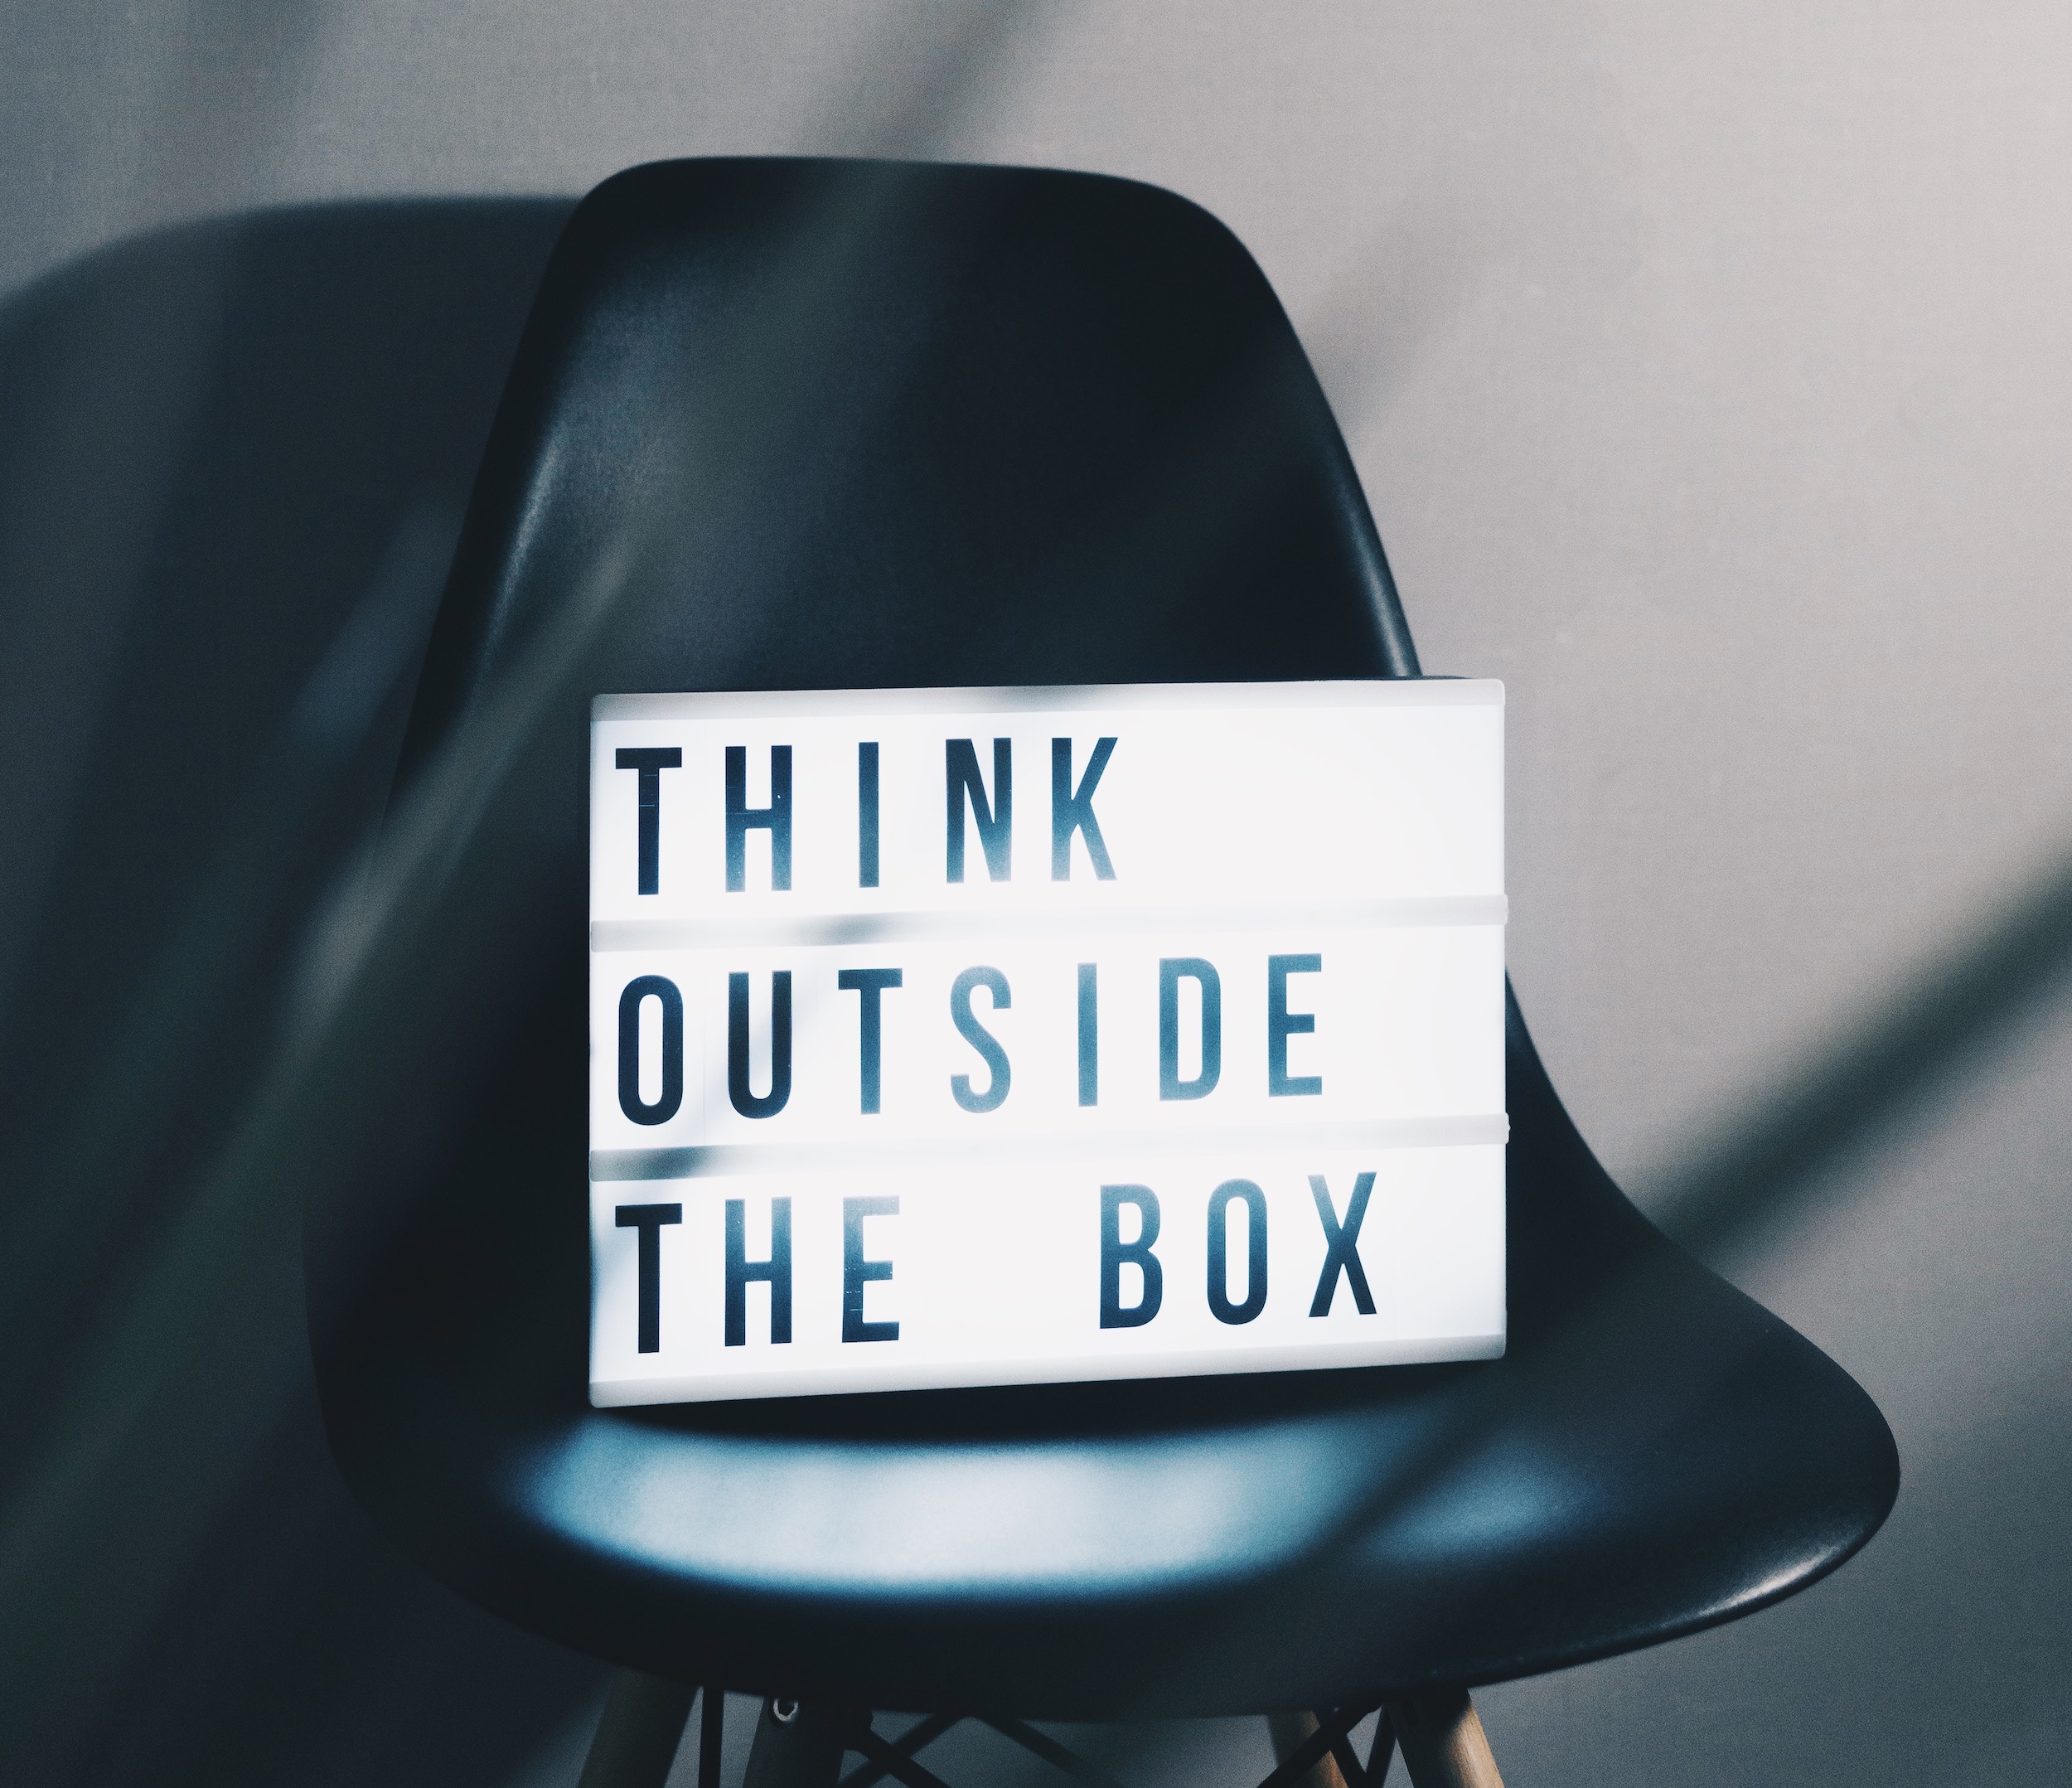 Chair with illuminated sign on it saying 'think outside the box'